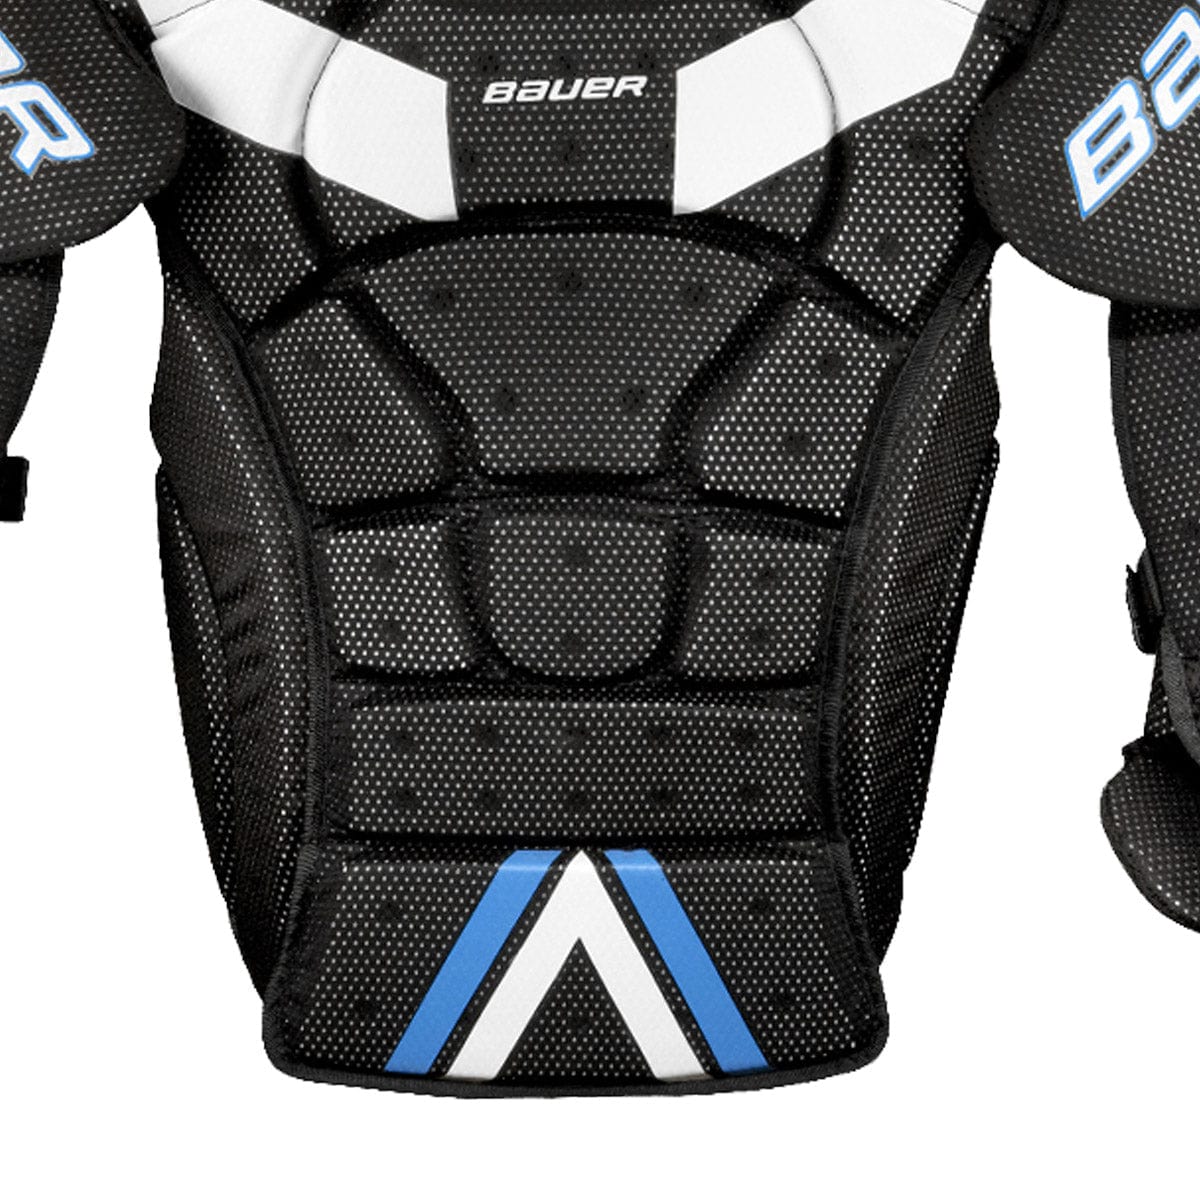 Bauer Junior Street Hockey Chest Protector (2015) - The Hockey Shop Source For Sports